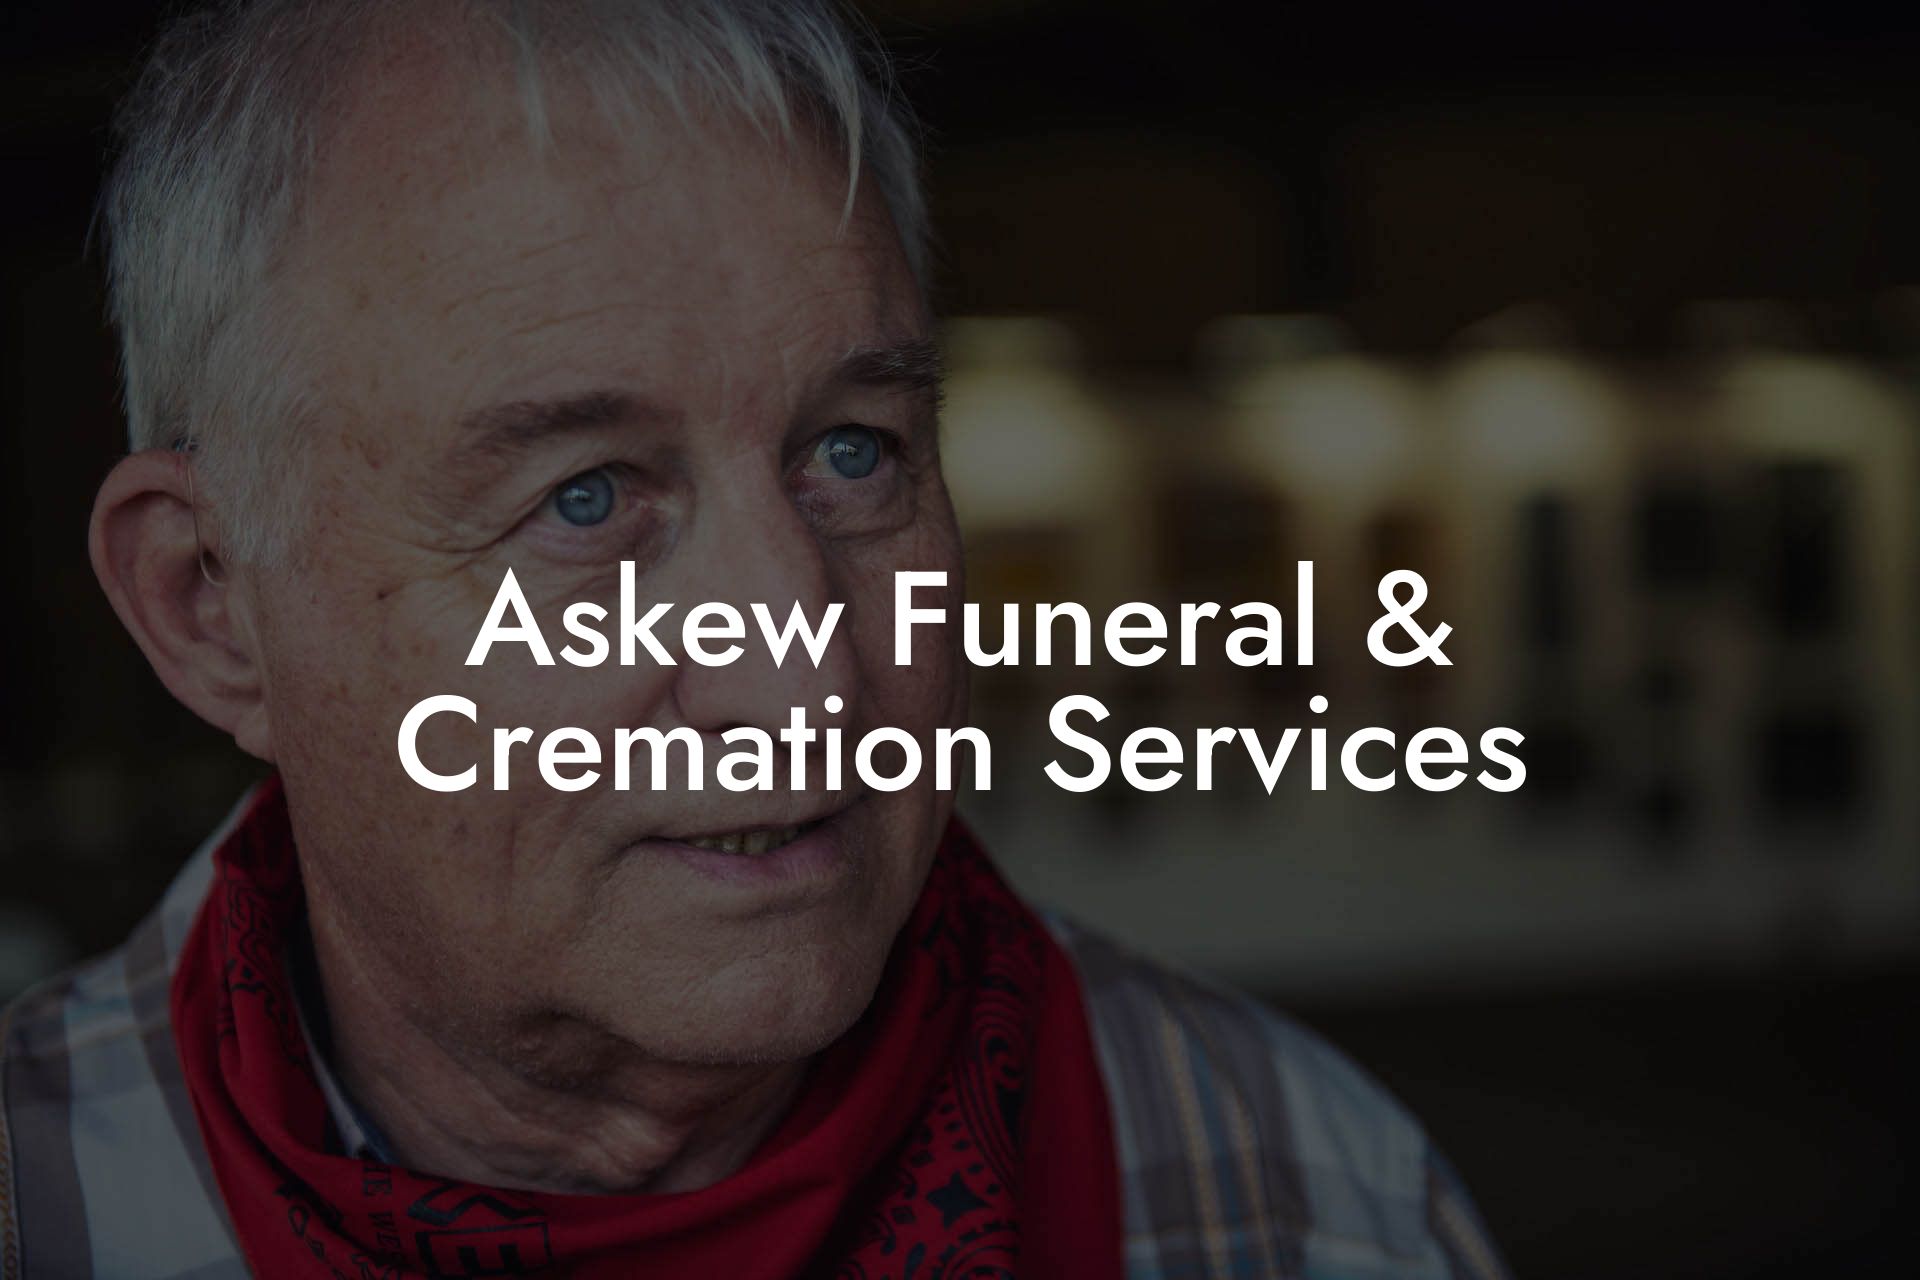 Askew Funeral & Cremation Services